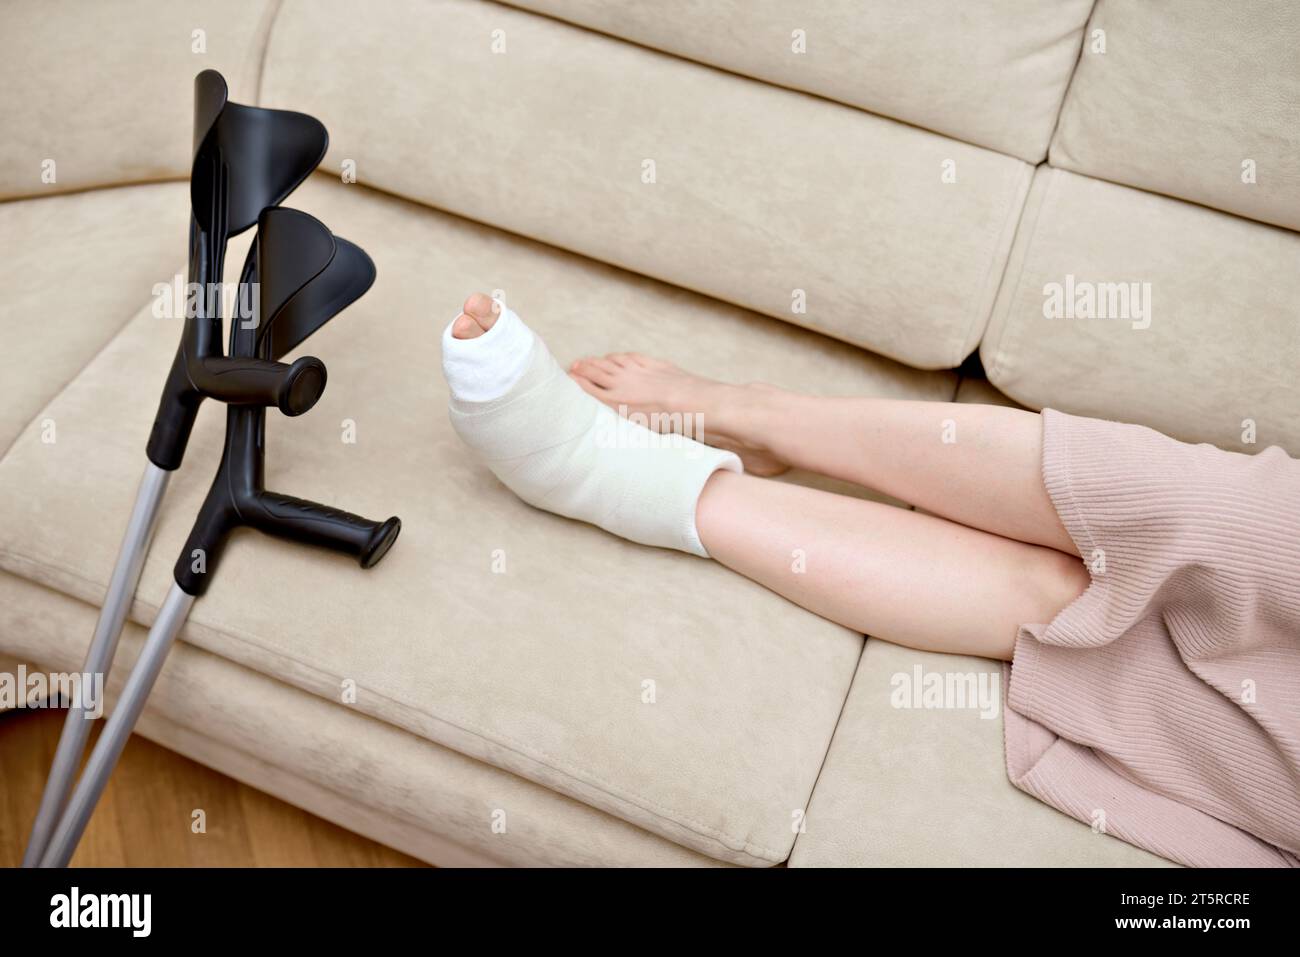 Young woman with foot bone fracture resting on couch at home. Adult's broken leg in a plaster cast. Crutches close by while sitting on the couch Stock Photo